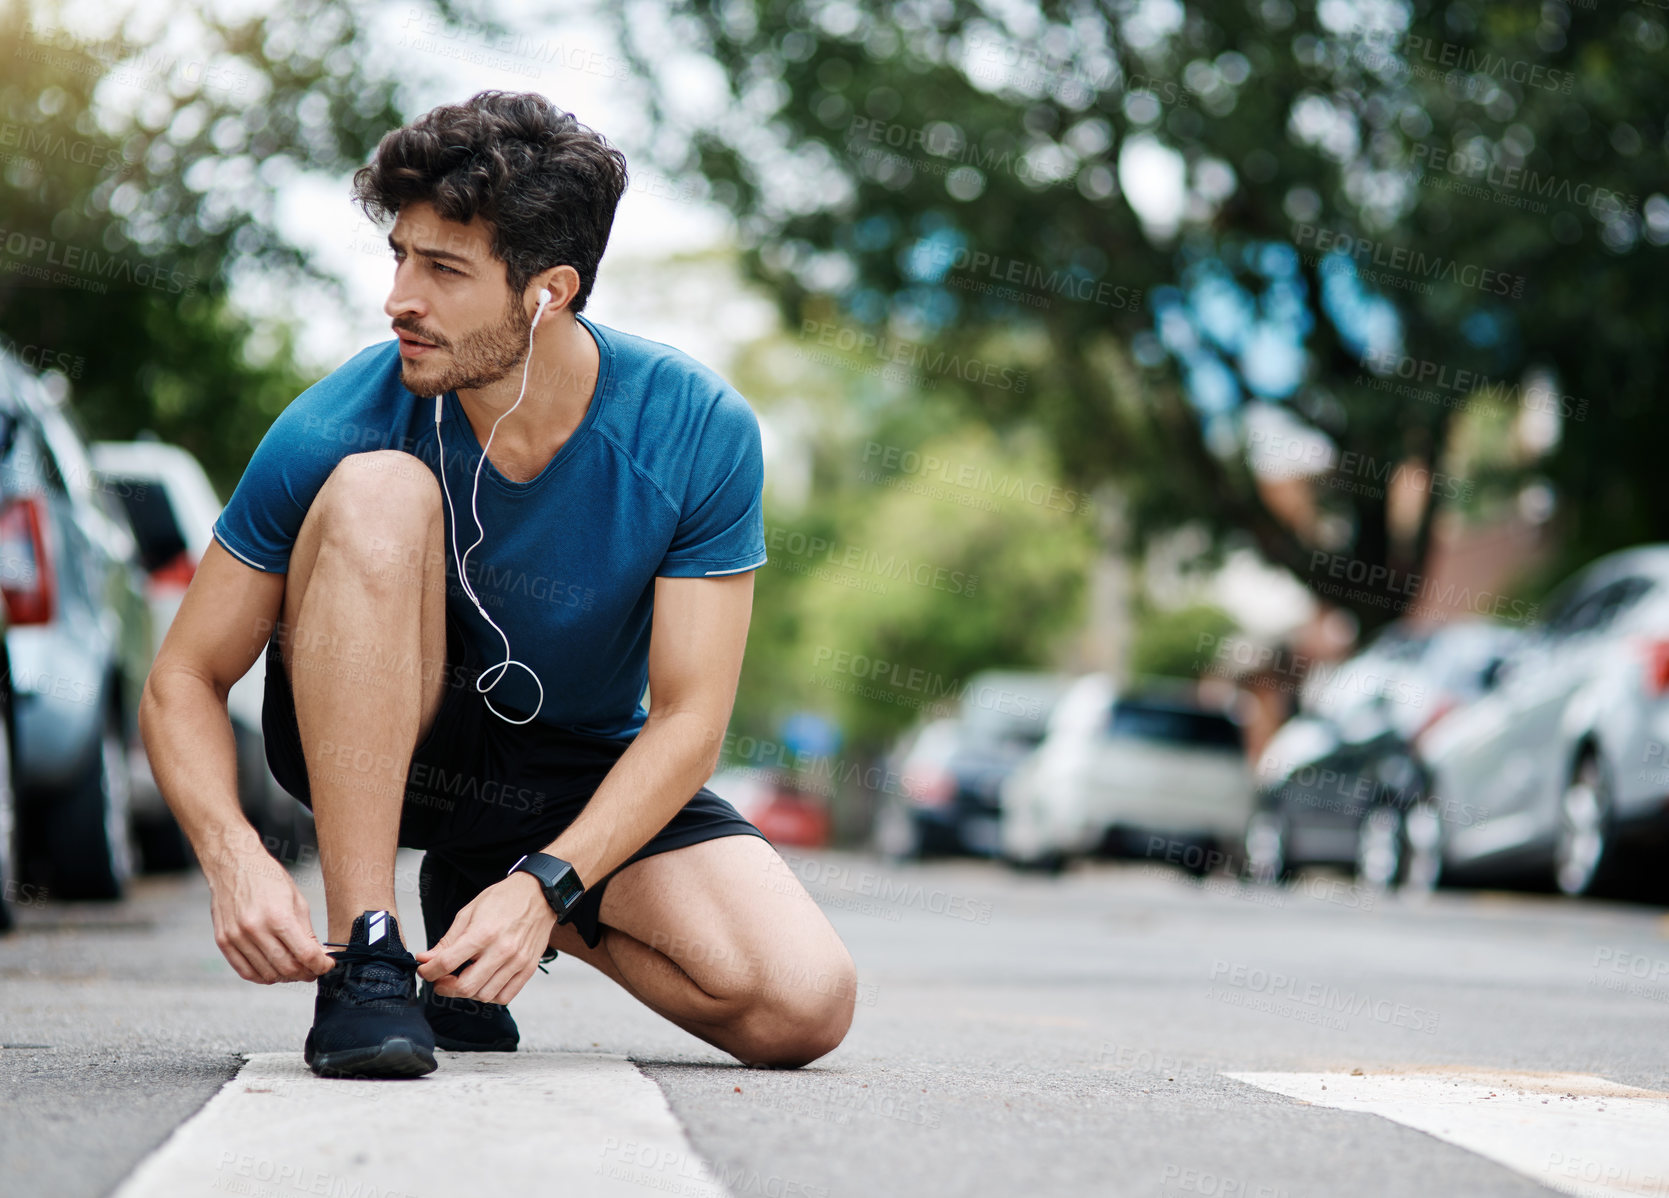 Buy stock photo Shot of a sporty young man tying his shoes before going for a jog outside during the day